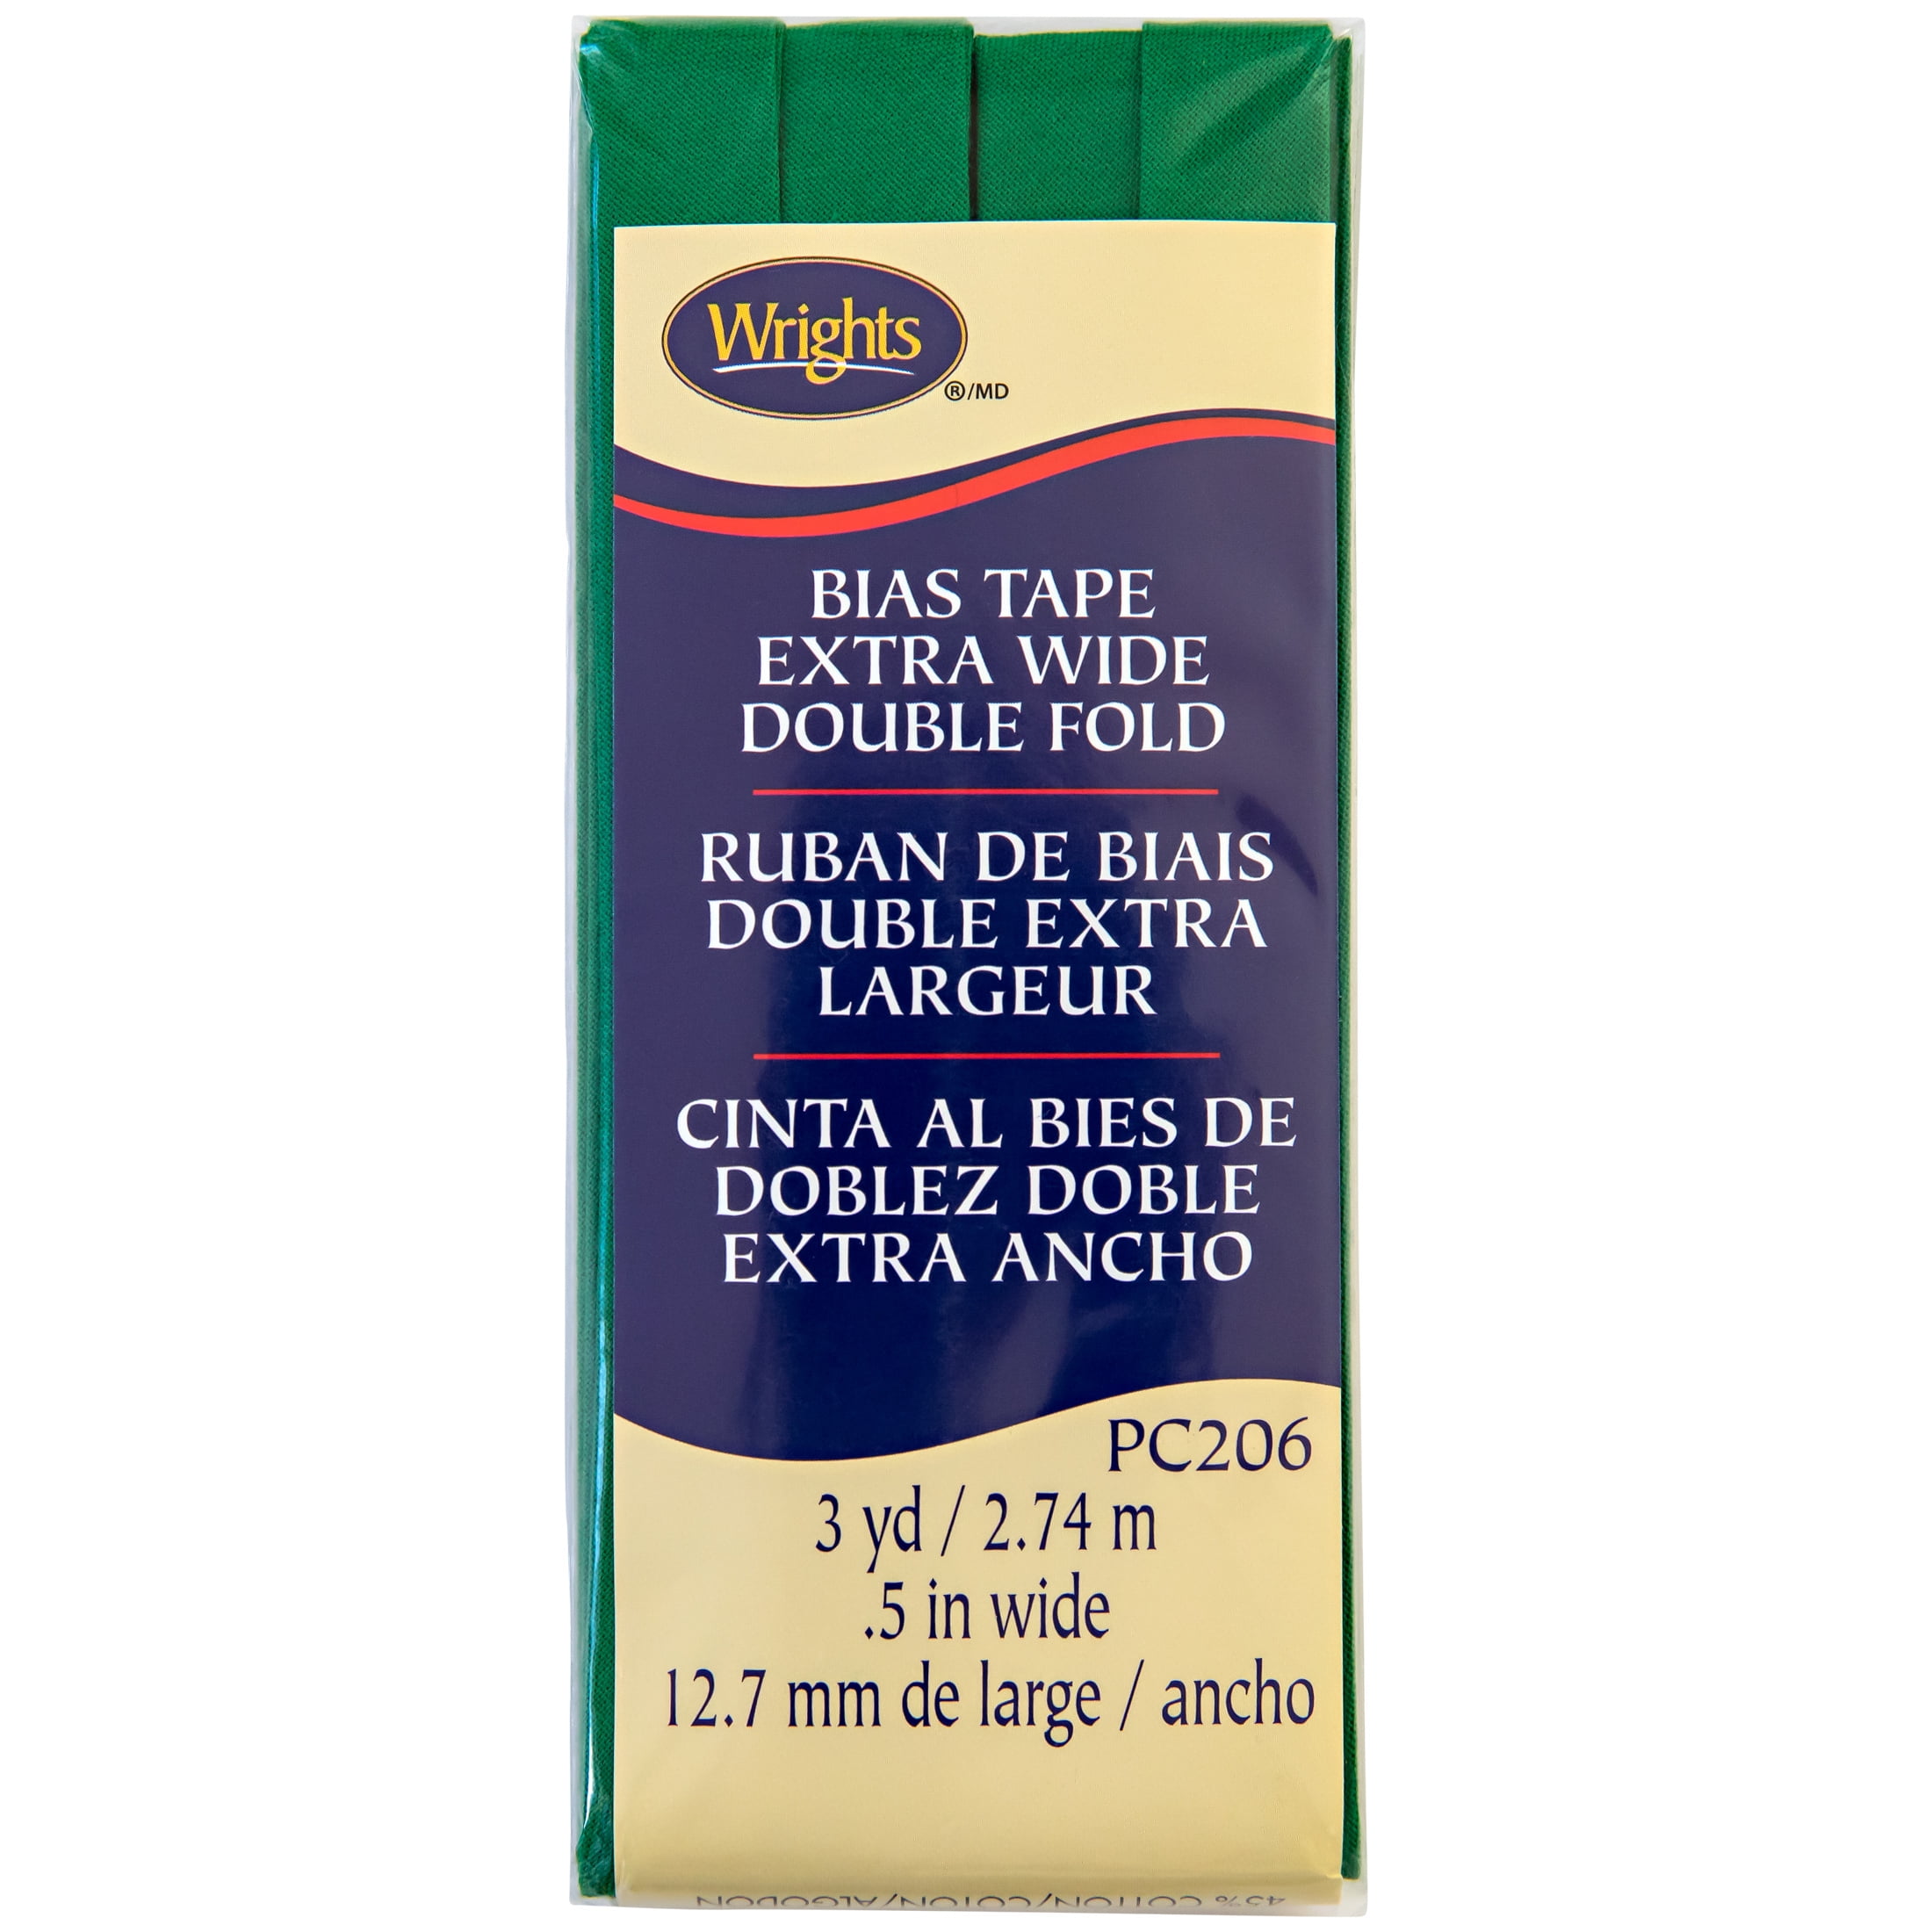 Wrights 1/2" Emerald Extra Wide Double Fold Bias Tape, 3 yd